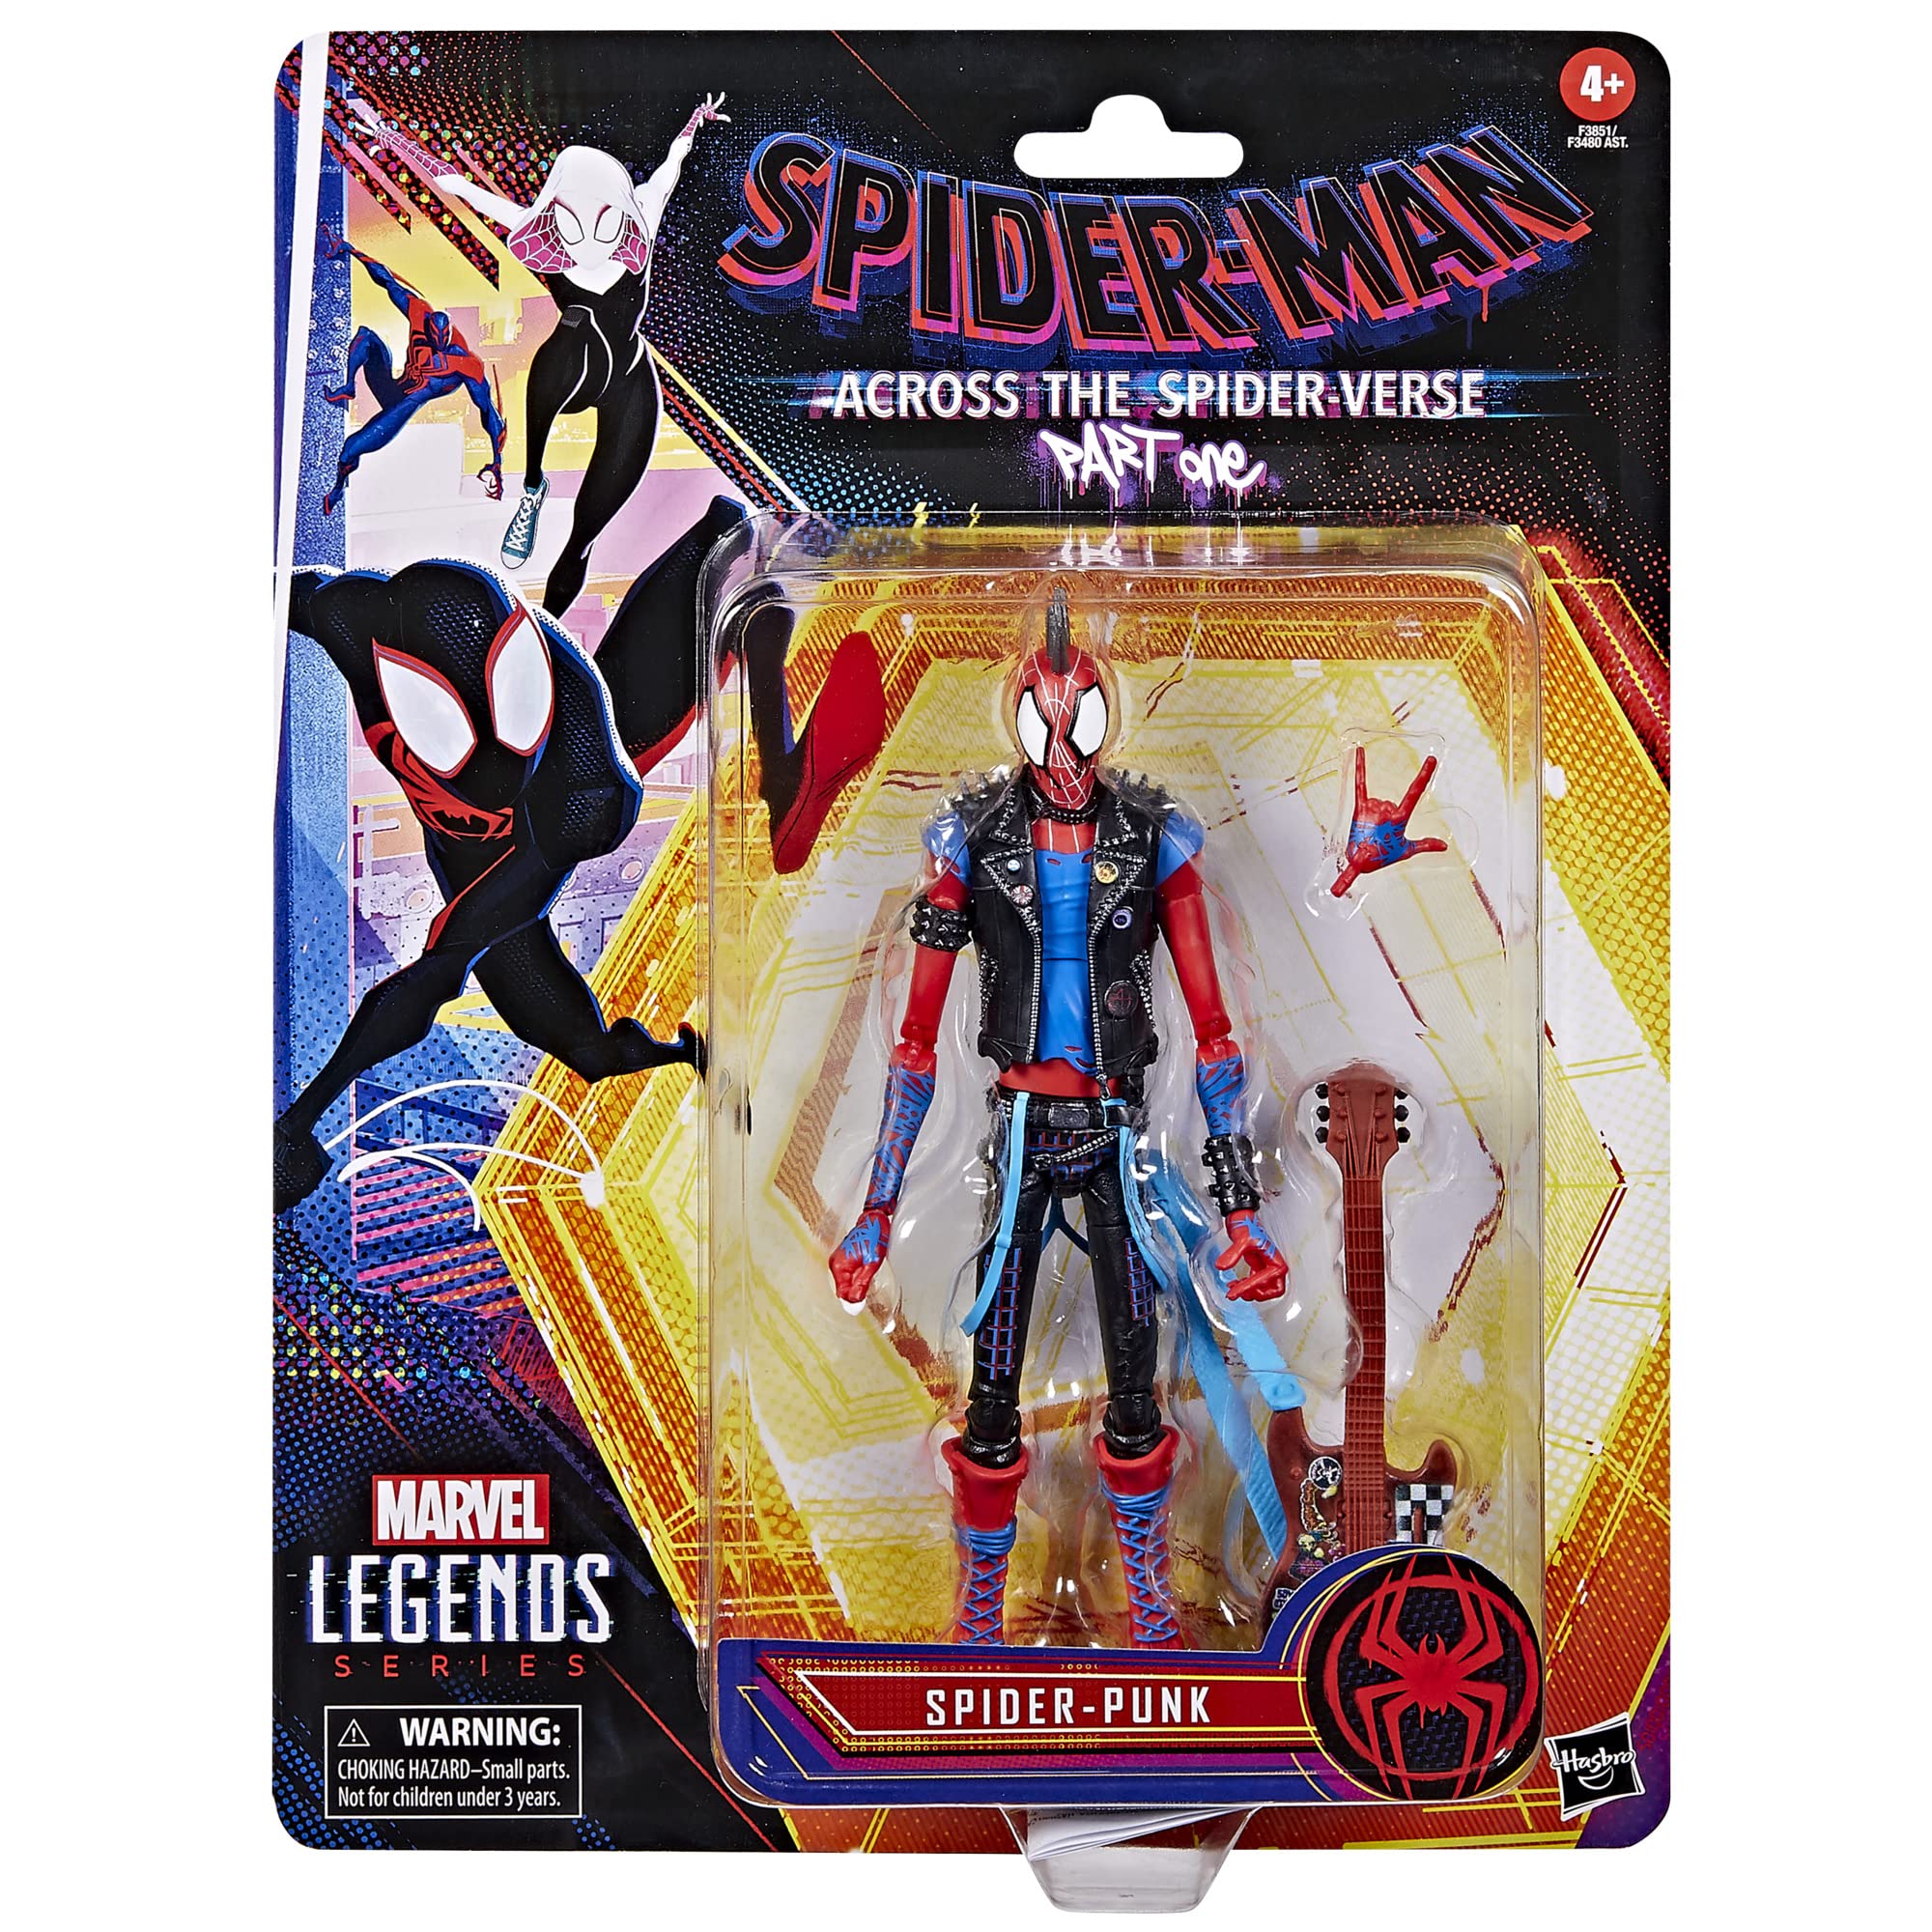 Spider-Man Marvel Legends Series Across The Spider-Verse Spider-Punk 6-inch Action Figure Toy, 1 Accessory